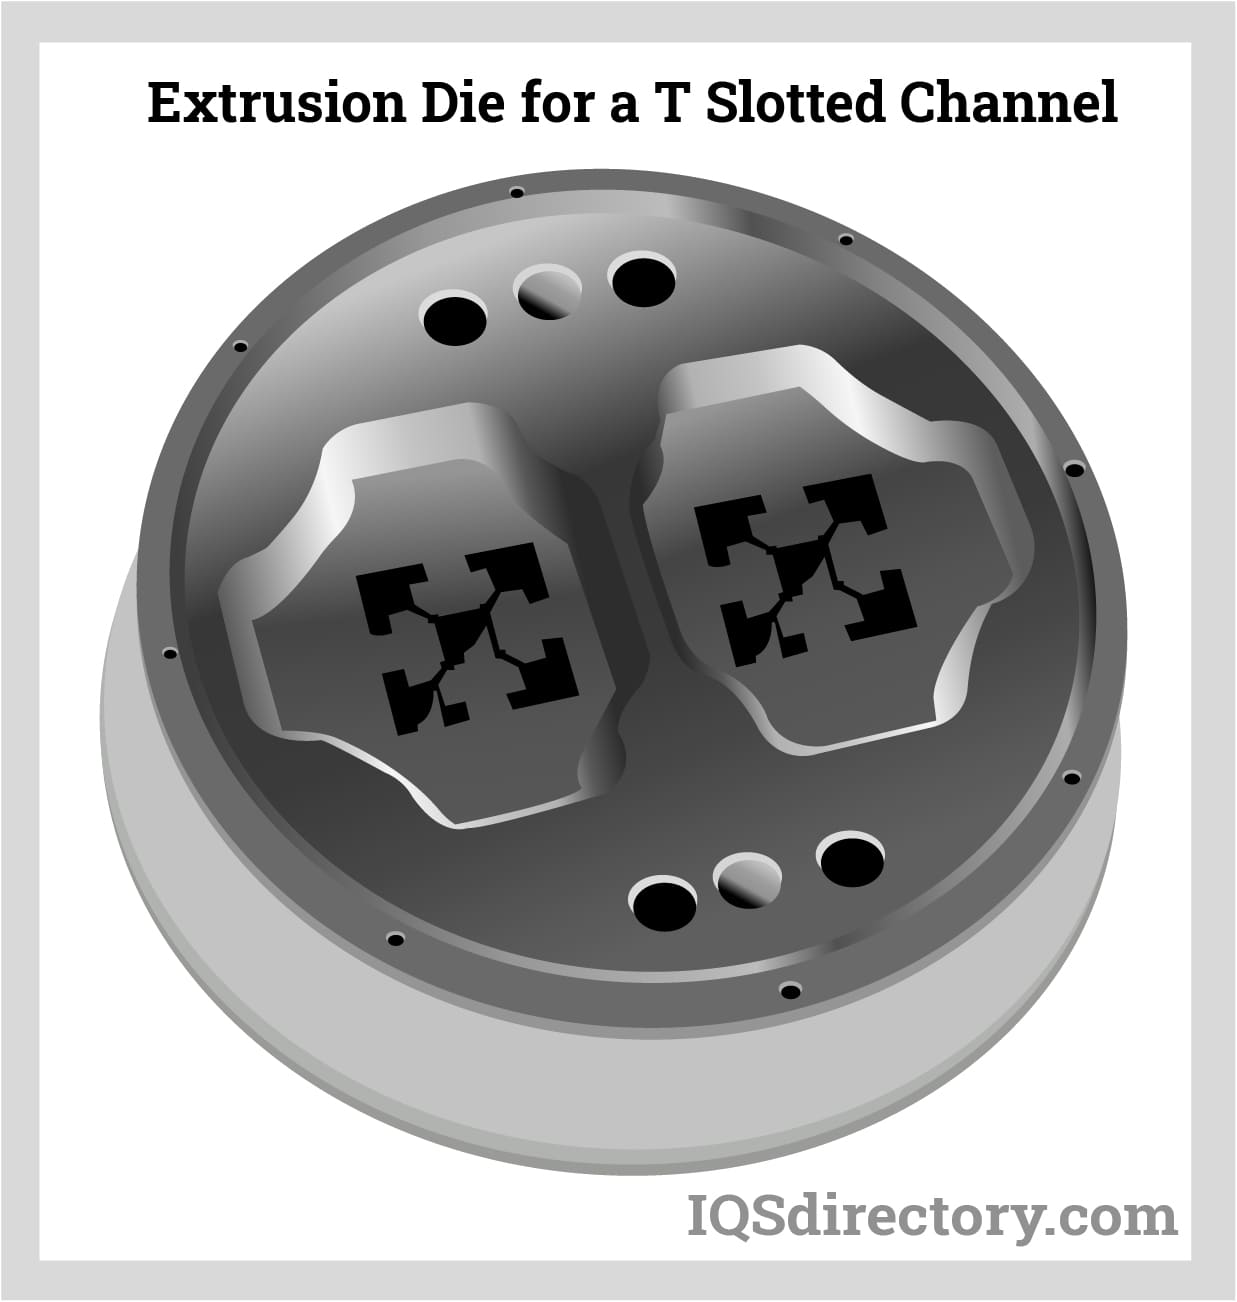 Extrusion Die for a T Slotted Channel